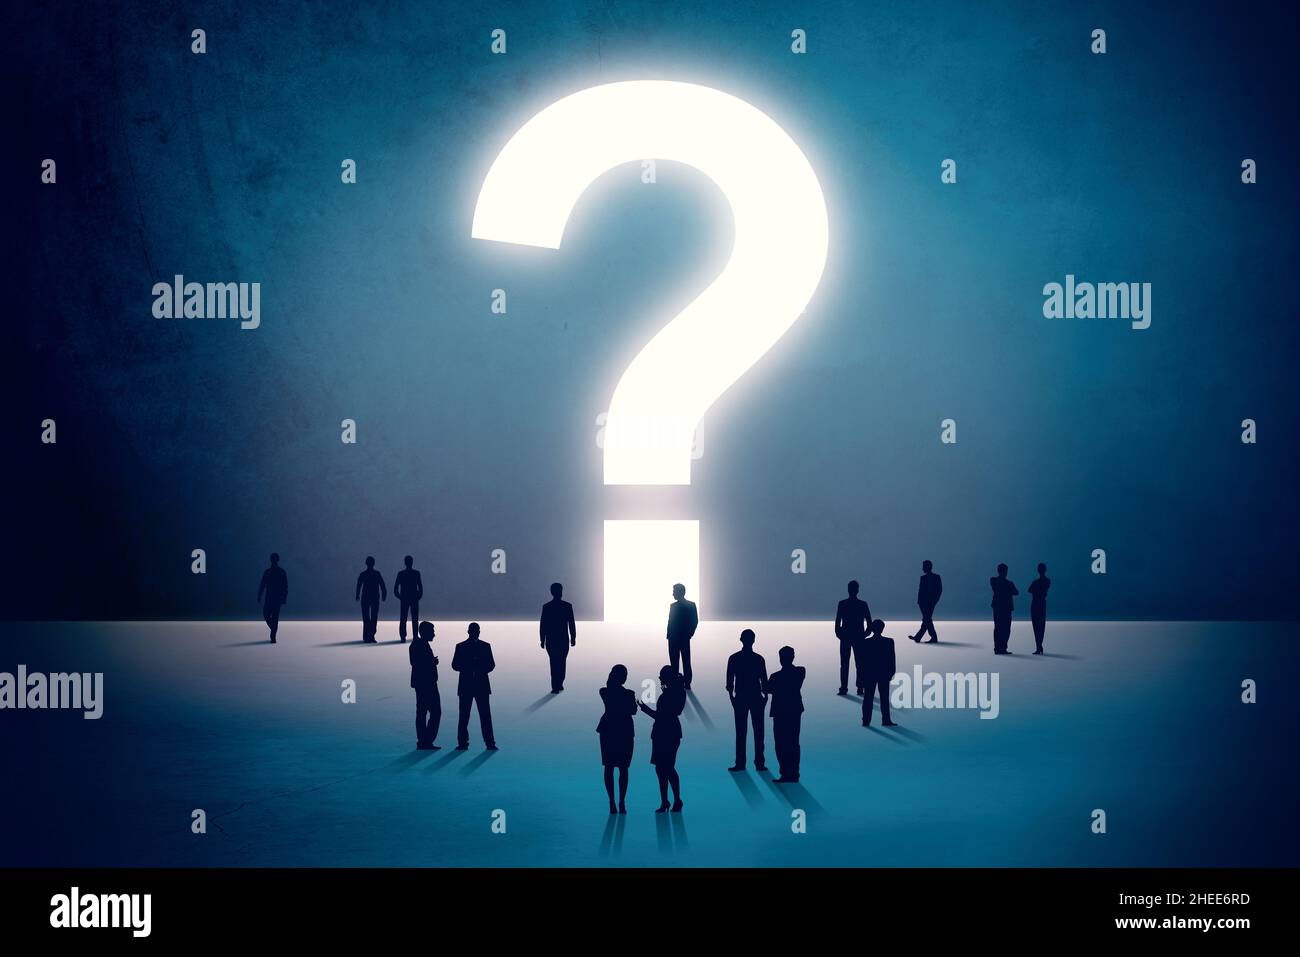 Large Question Mark - Questions and Doubts - Business People With Doubts Stock Photo